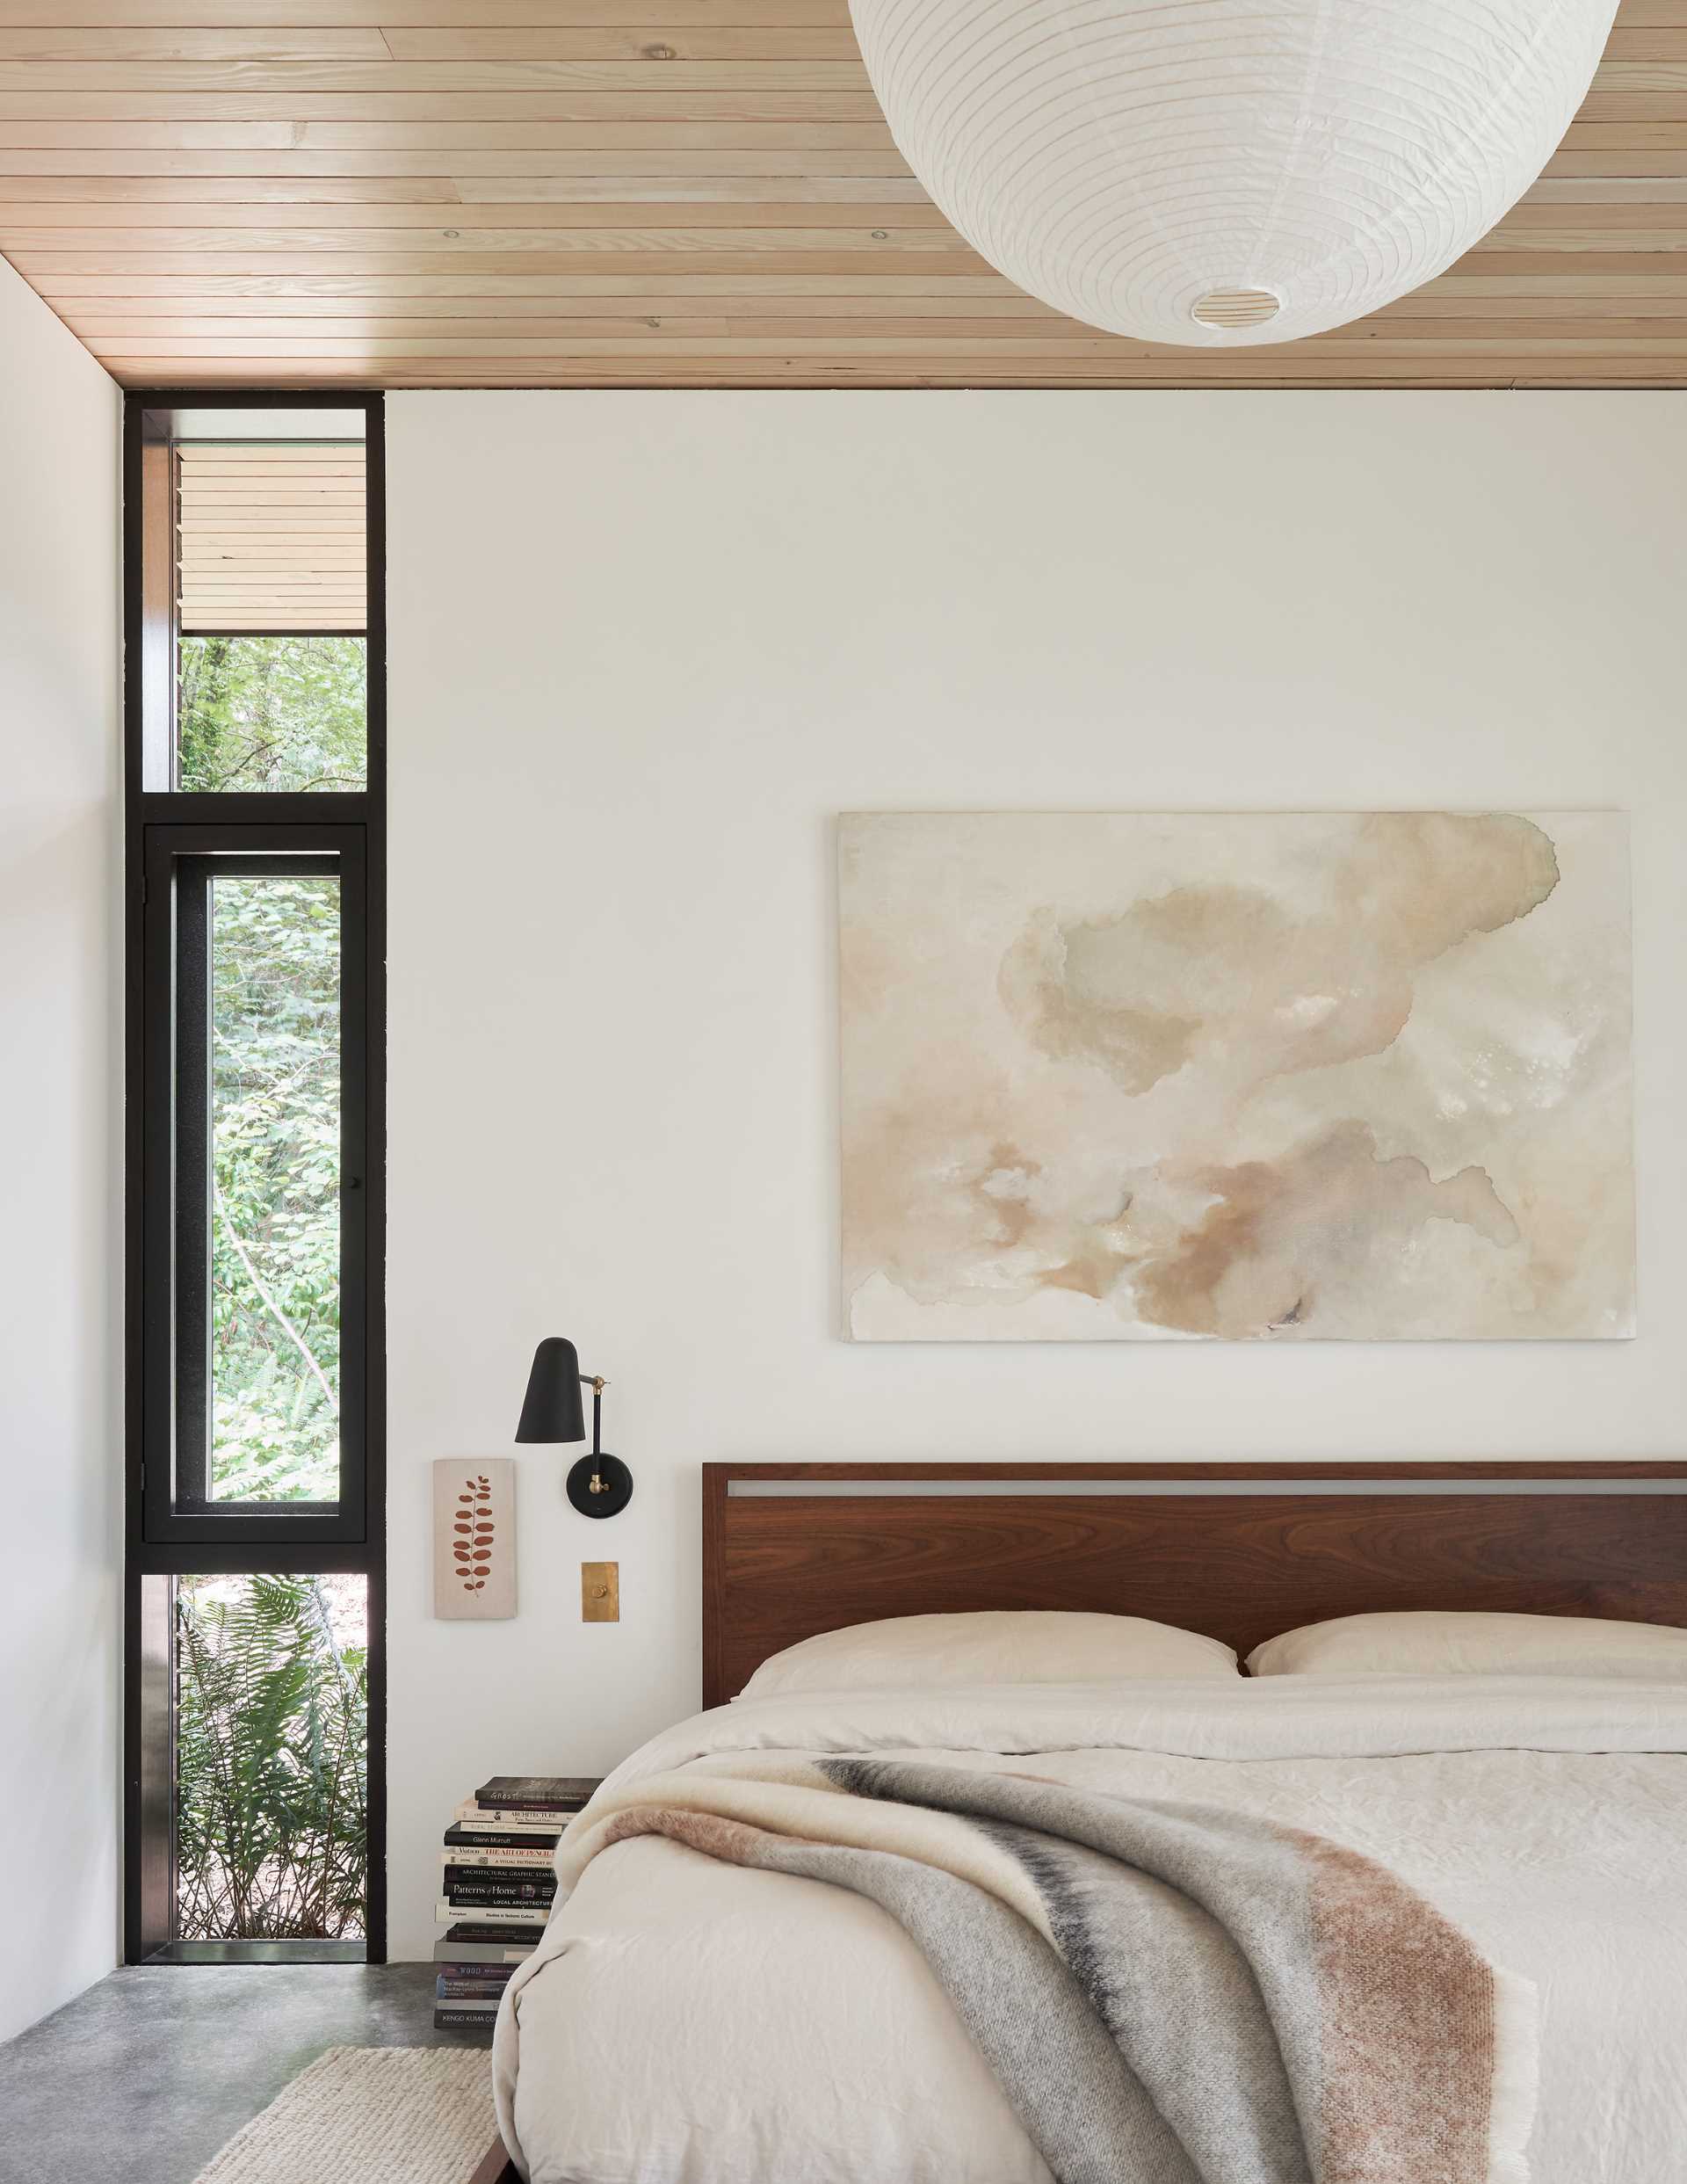 This modern bedroom features a custom bed designed by the architects and built by Joel Kikuchi, while an ivory woven wool rug softens the polished concrete floor.